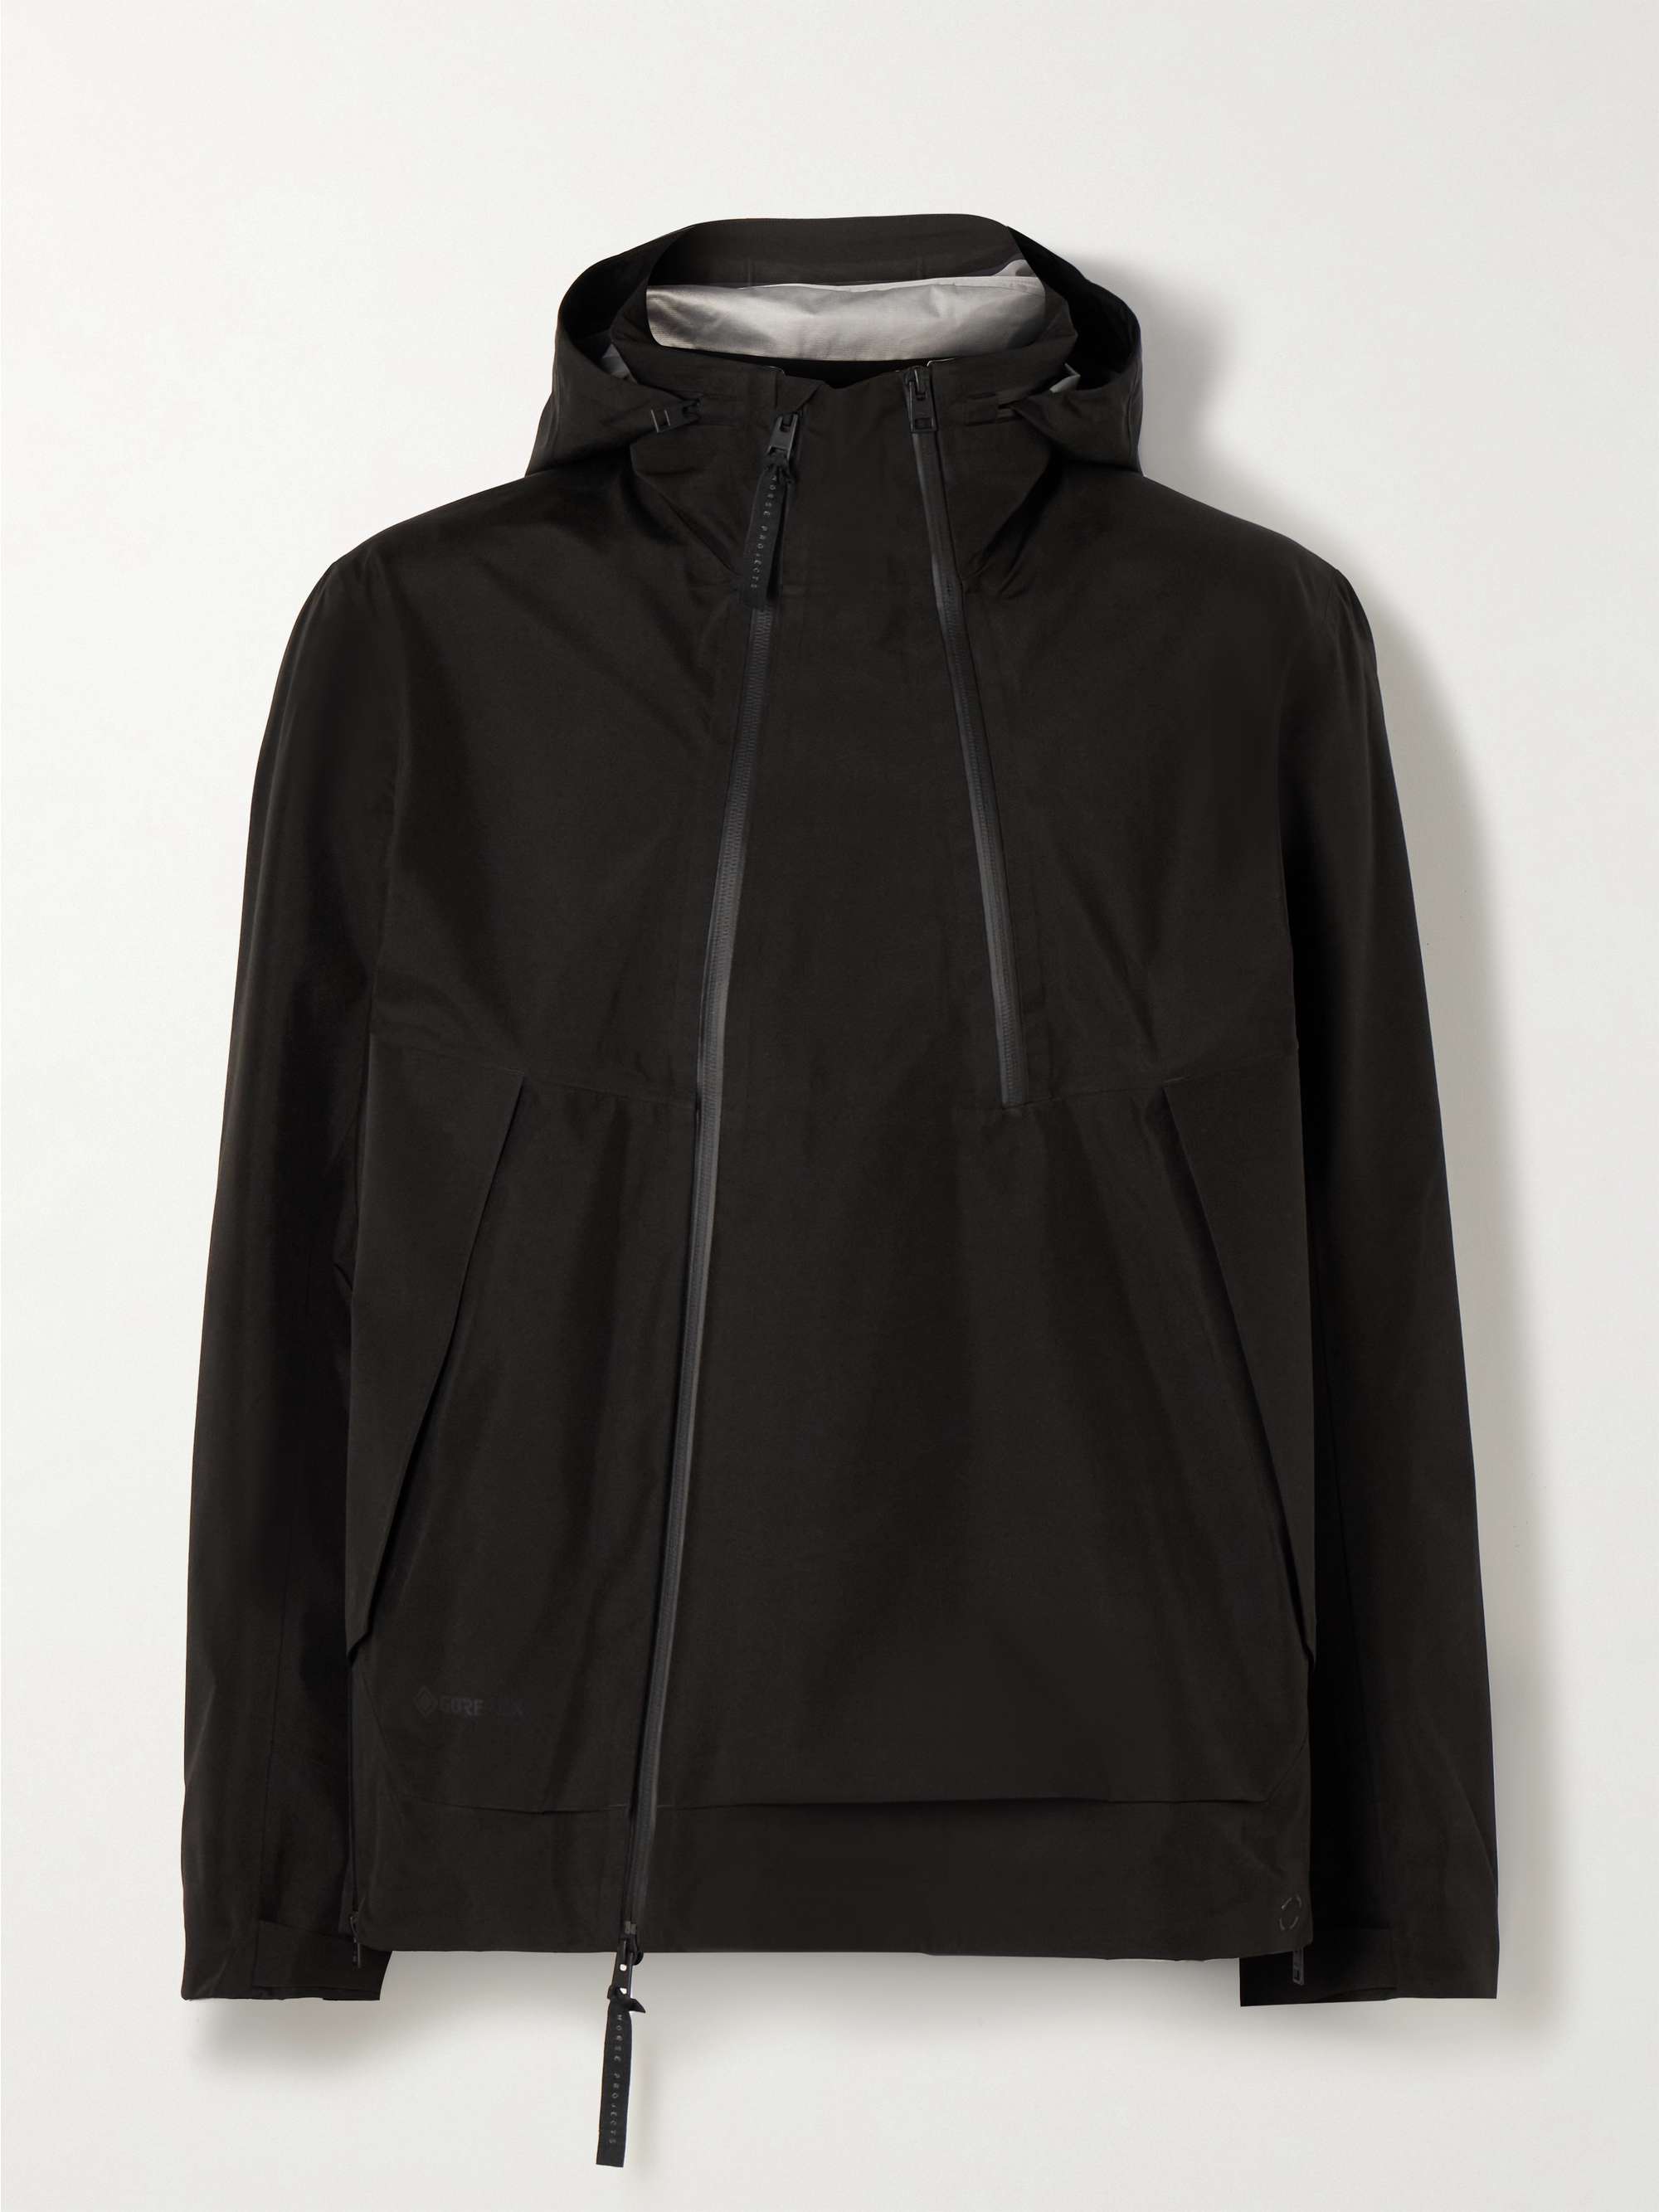 NORSE PROJECTS ARKTISK GORE-TEX® Shell Hooded Jacket for Men | MR PORTER